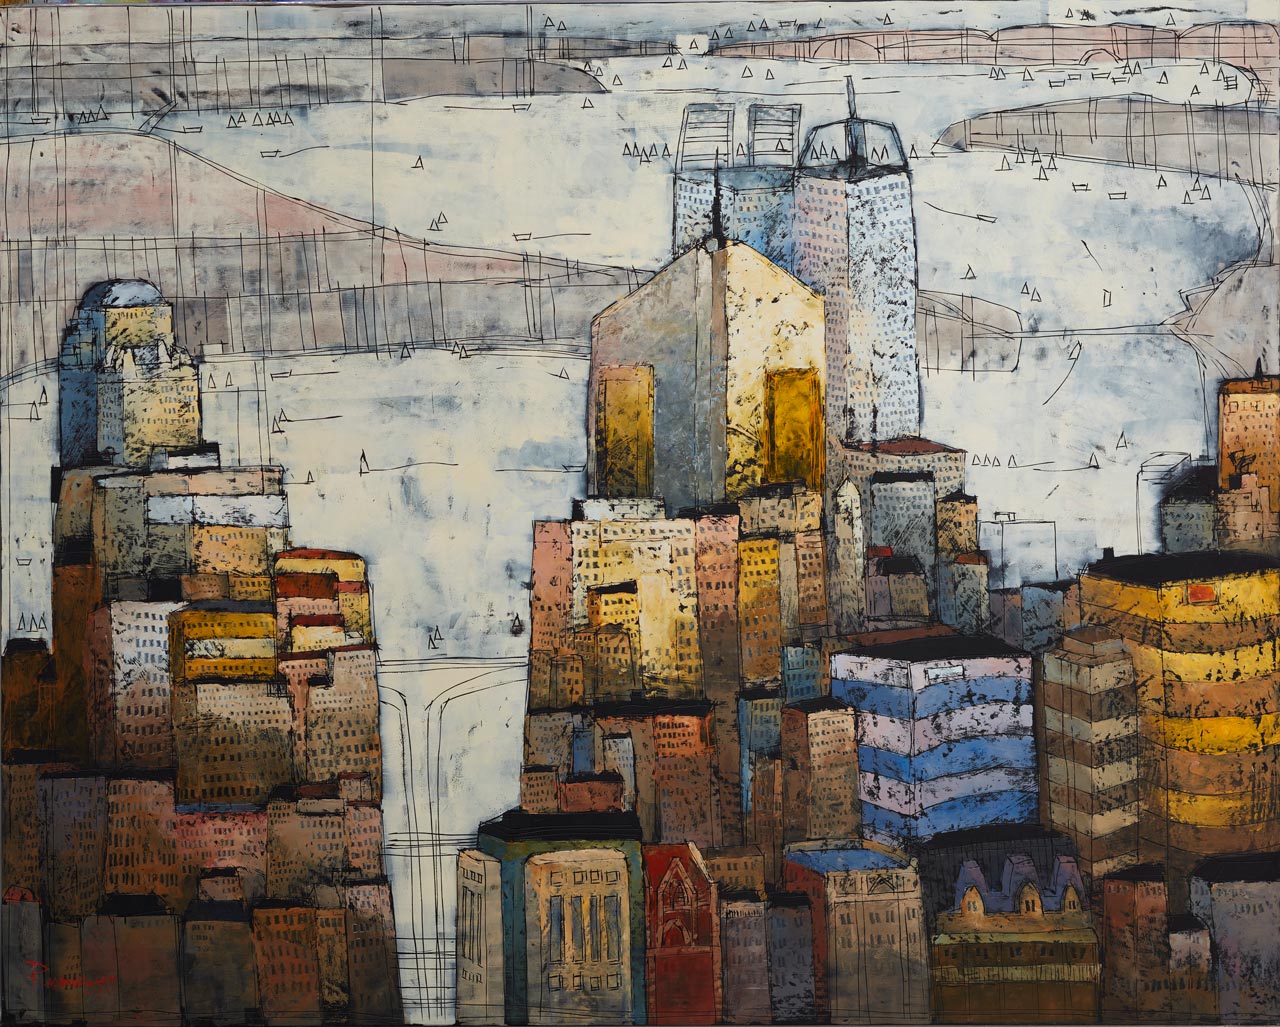 Big Radiant City, an oil painting by Ken Rasmussen